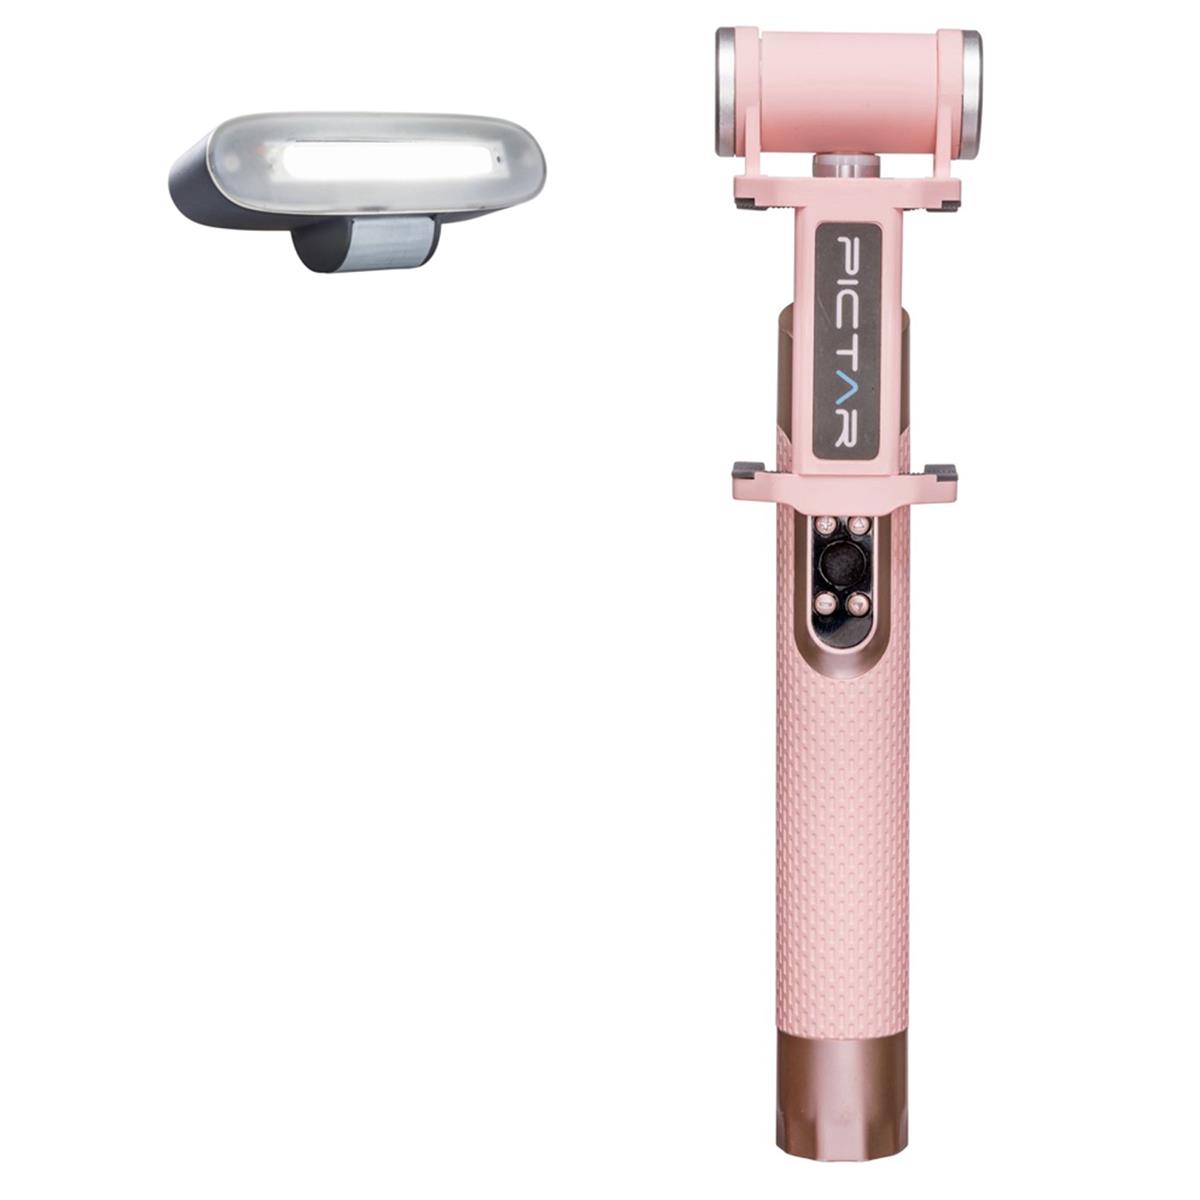 Image of Pictar Smart Light Selfie Stick with Rechargeable Battery